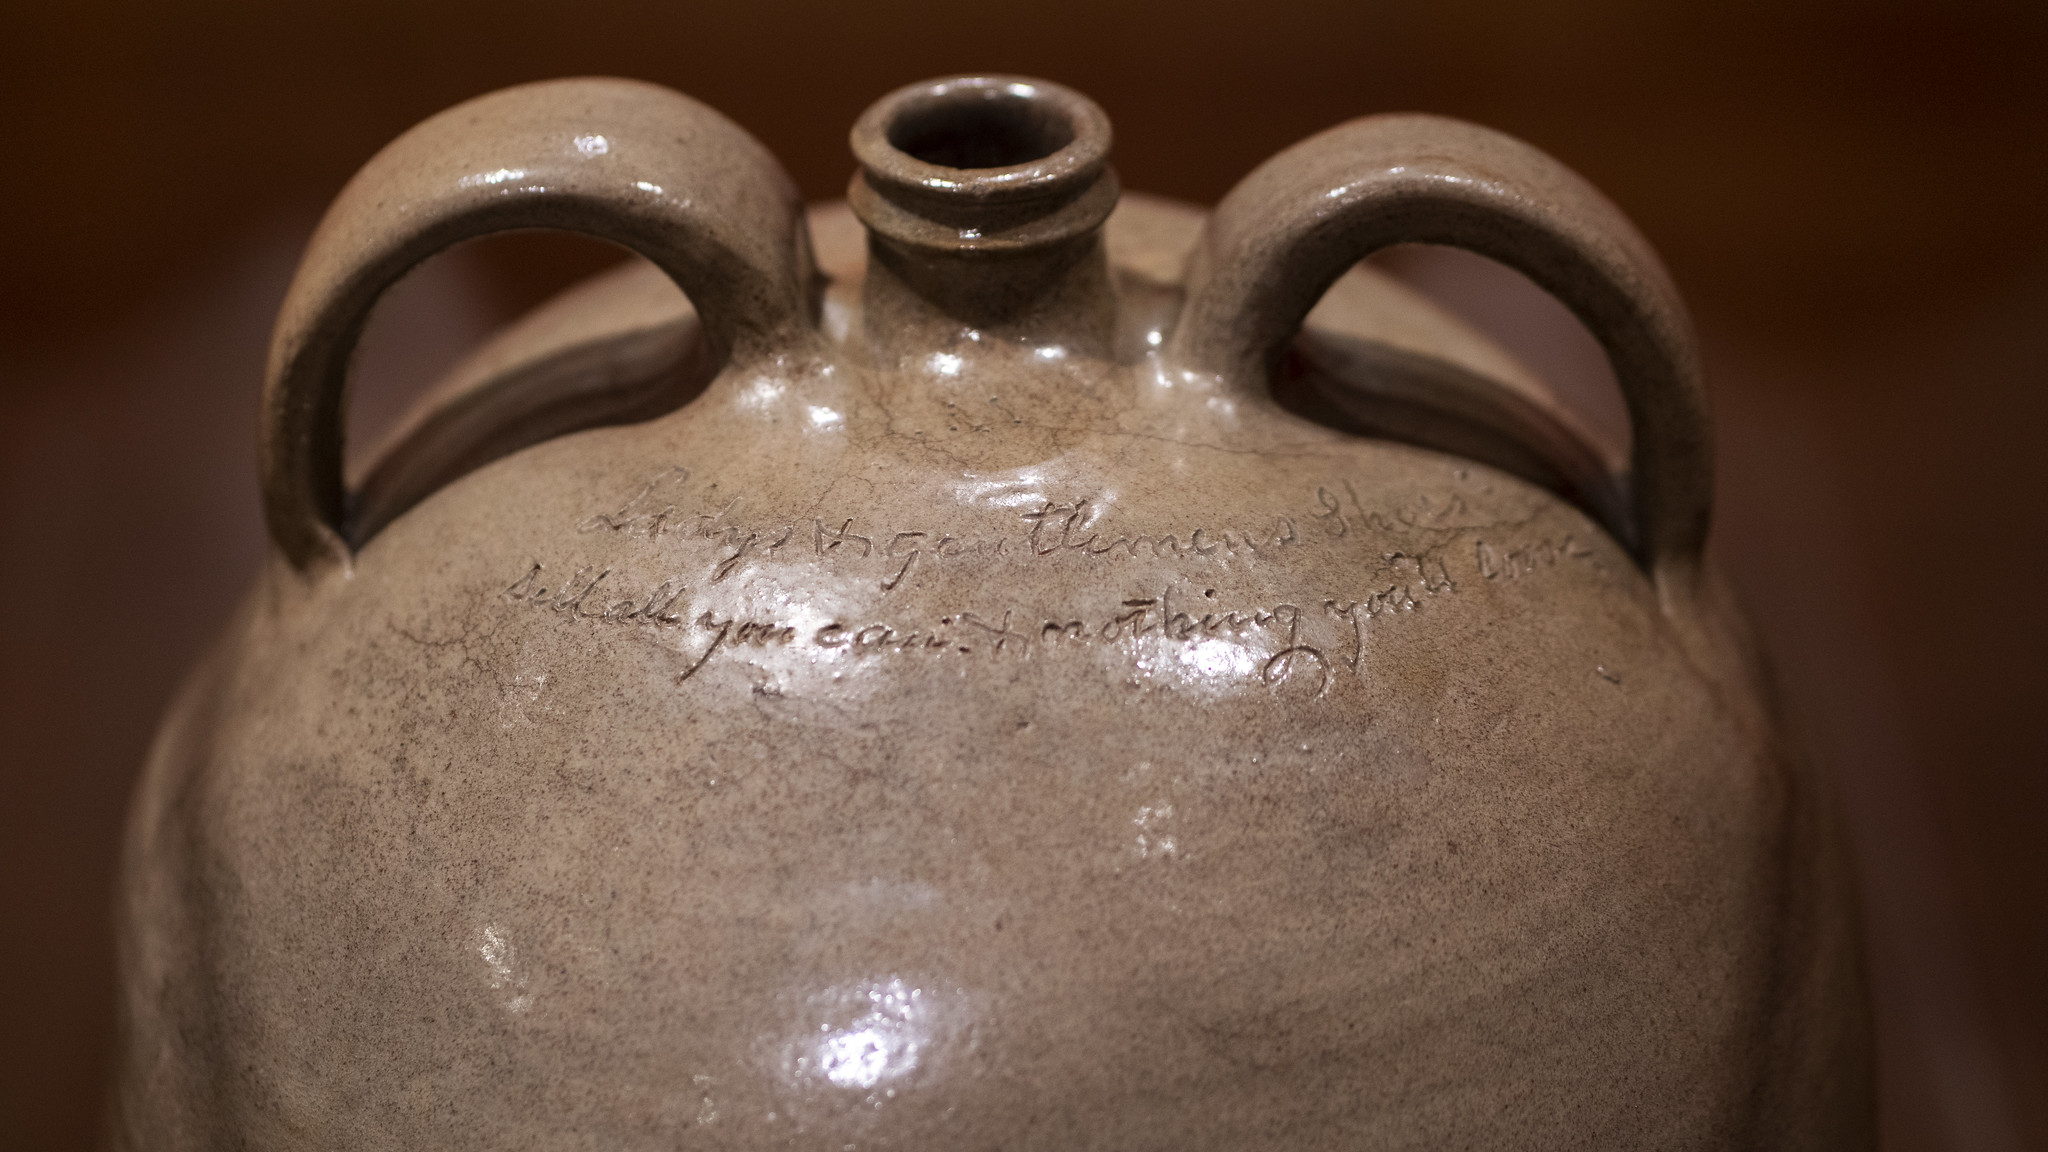 Poem detail, David Drake, Doubled-handled Jug (Lewis J. Miles Factory, Horse Creek Valley, Edgefield District, South Carolina), 1840, stoneware with alkaline glaze, 44.13 x 35.24 cm (Virginia Museum of Fine Arts; photo: Steven Zucker, CC BY-NC-SA 2.0)